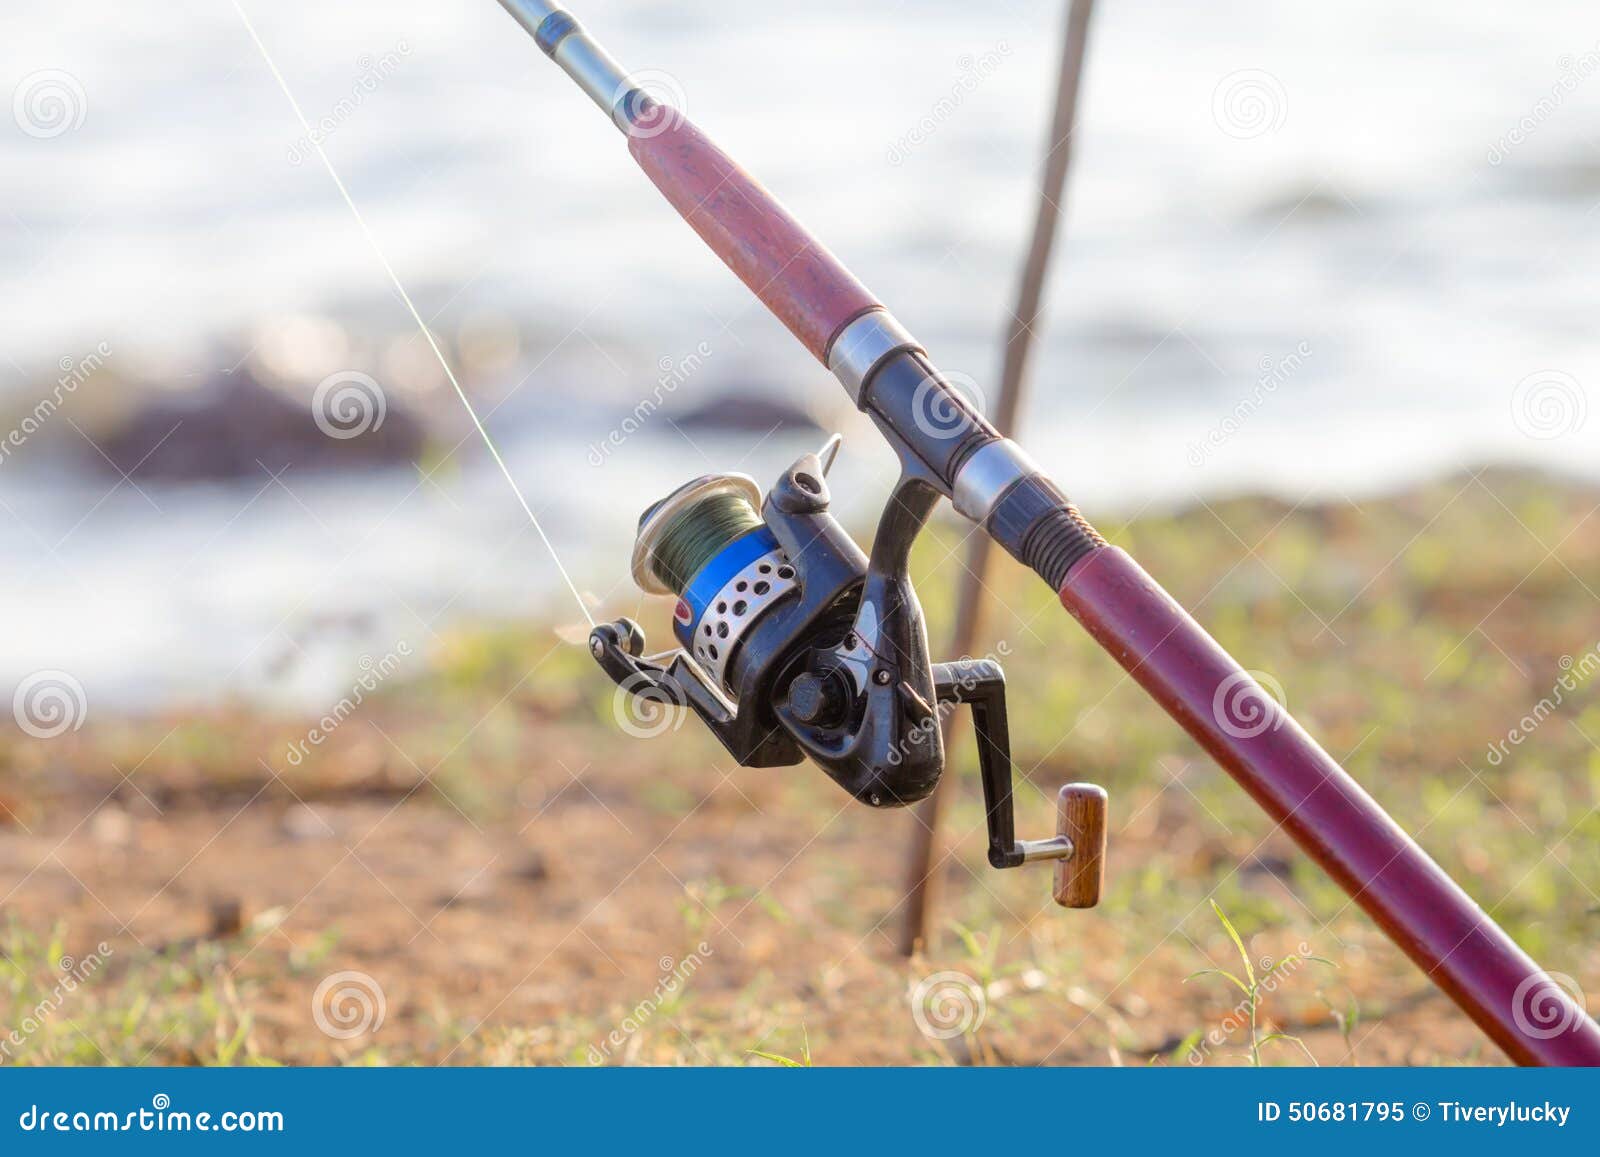 1,553 Fishing Pole Closeup Stock Photos - Free & Royalty-Free Stock Photos  from Dreamstime